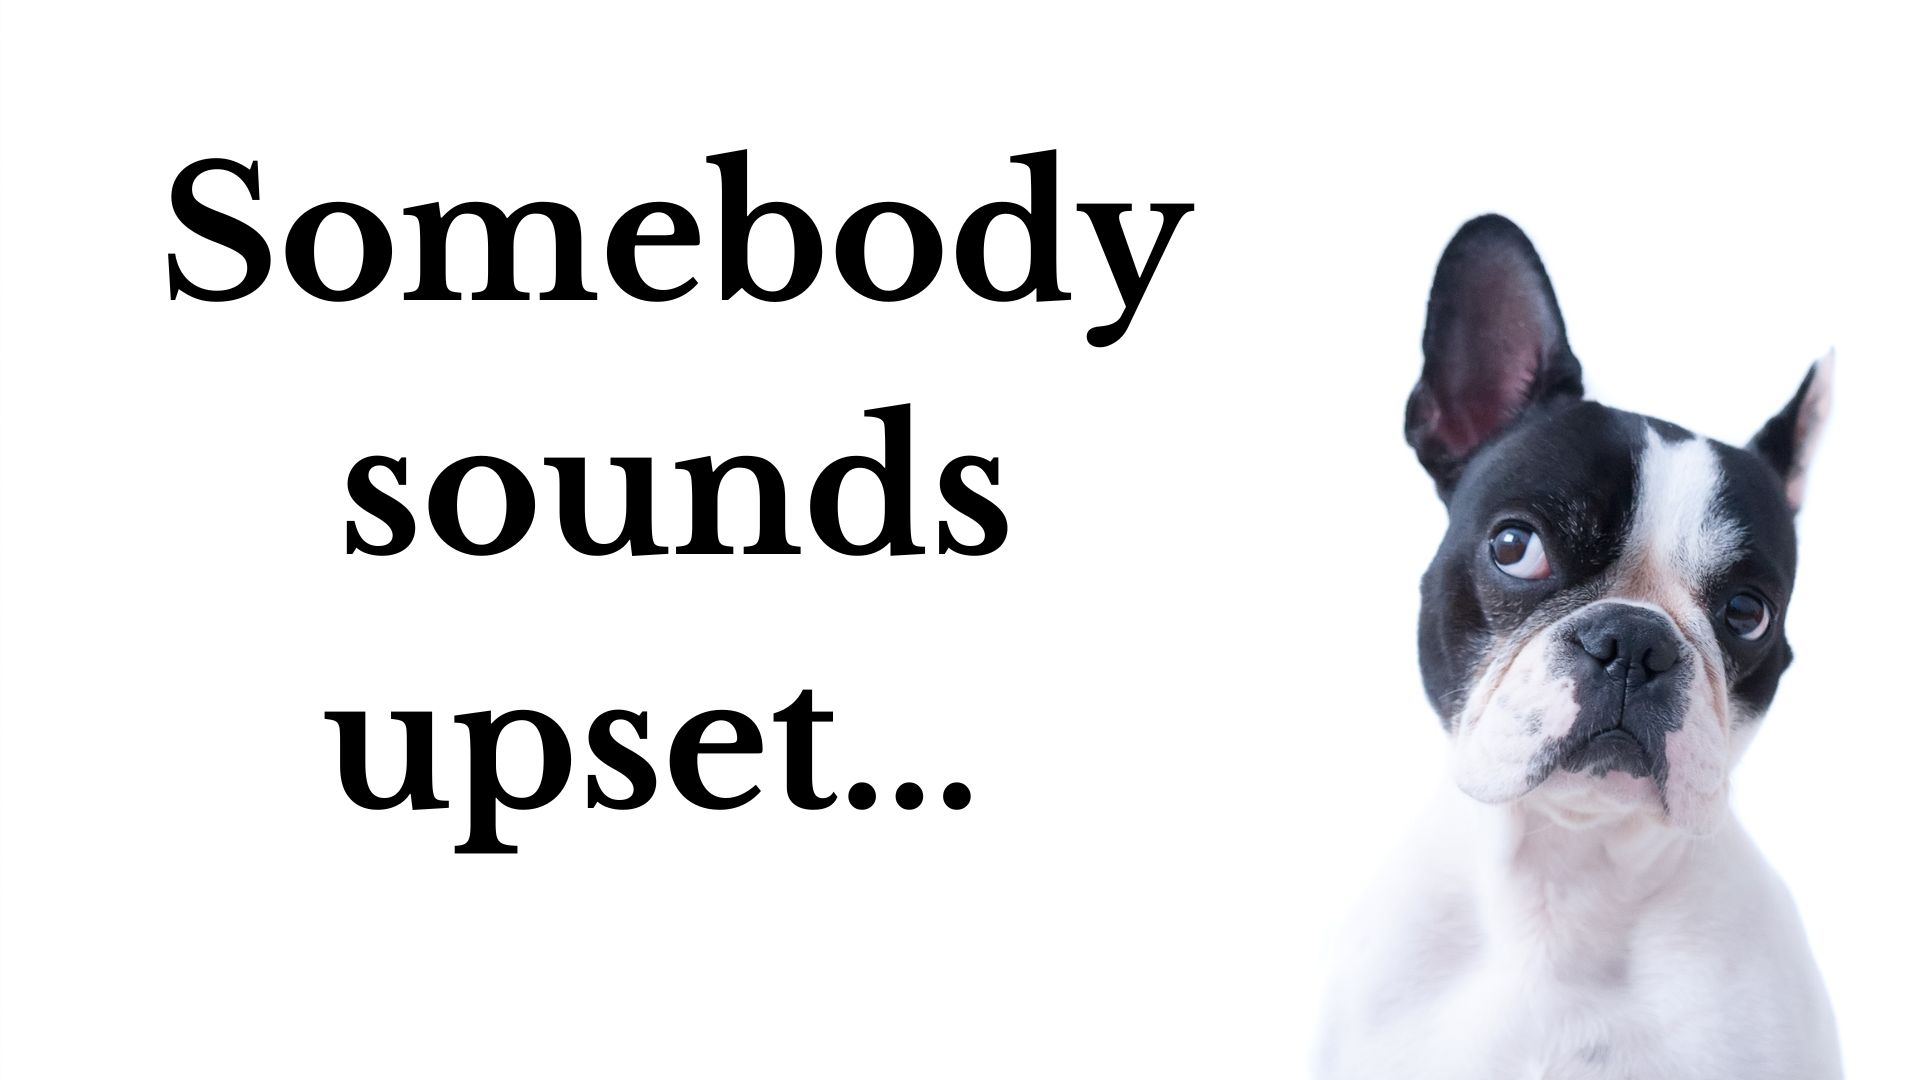 Boston Terrier listening and words "somebody sounds upset"